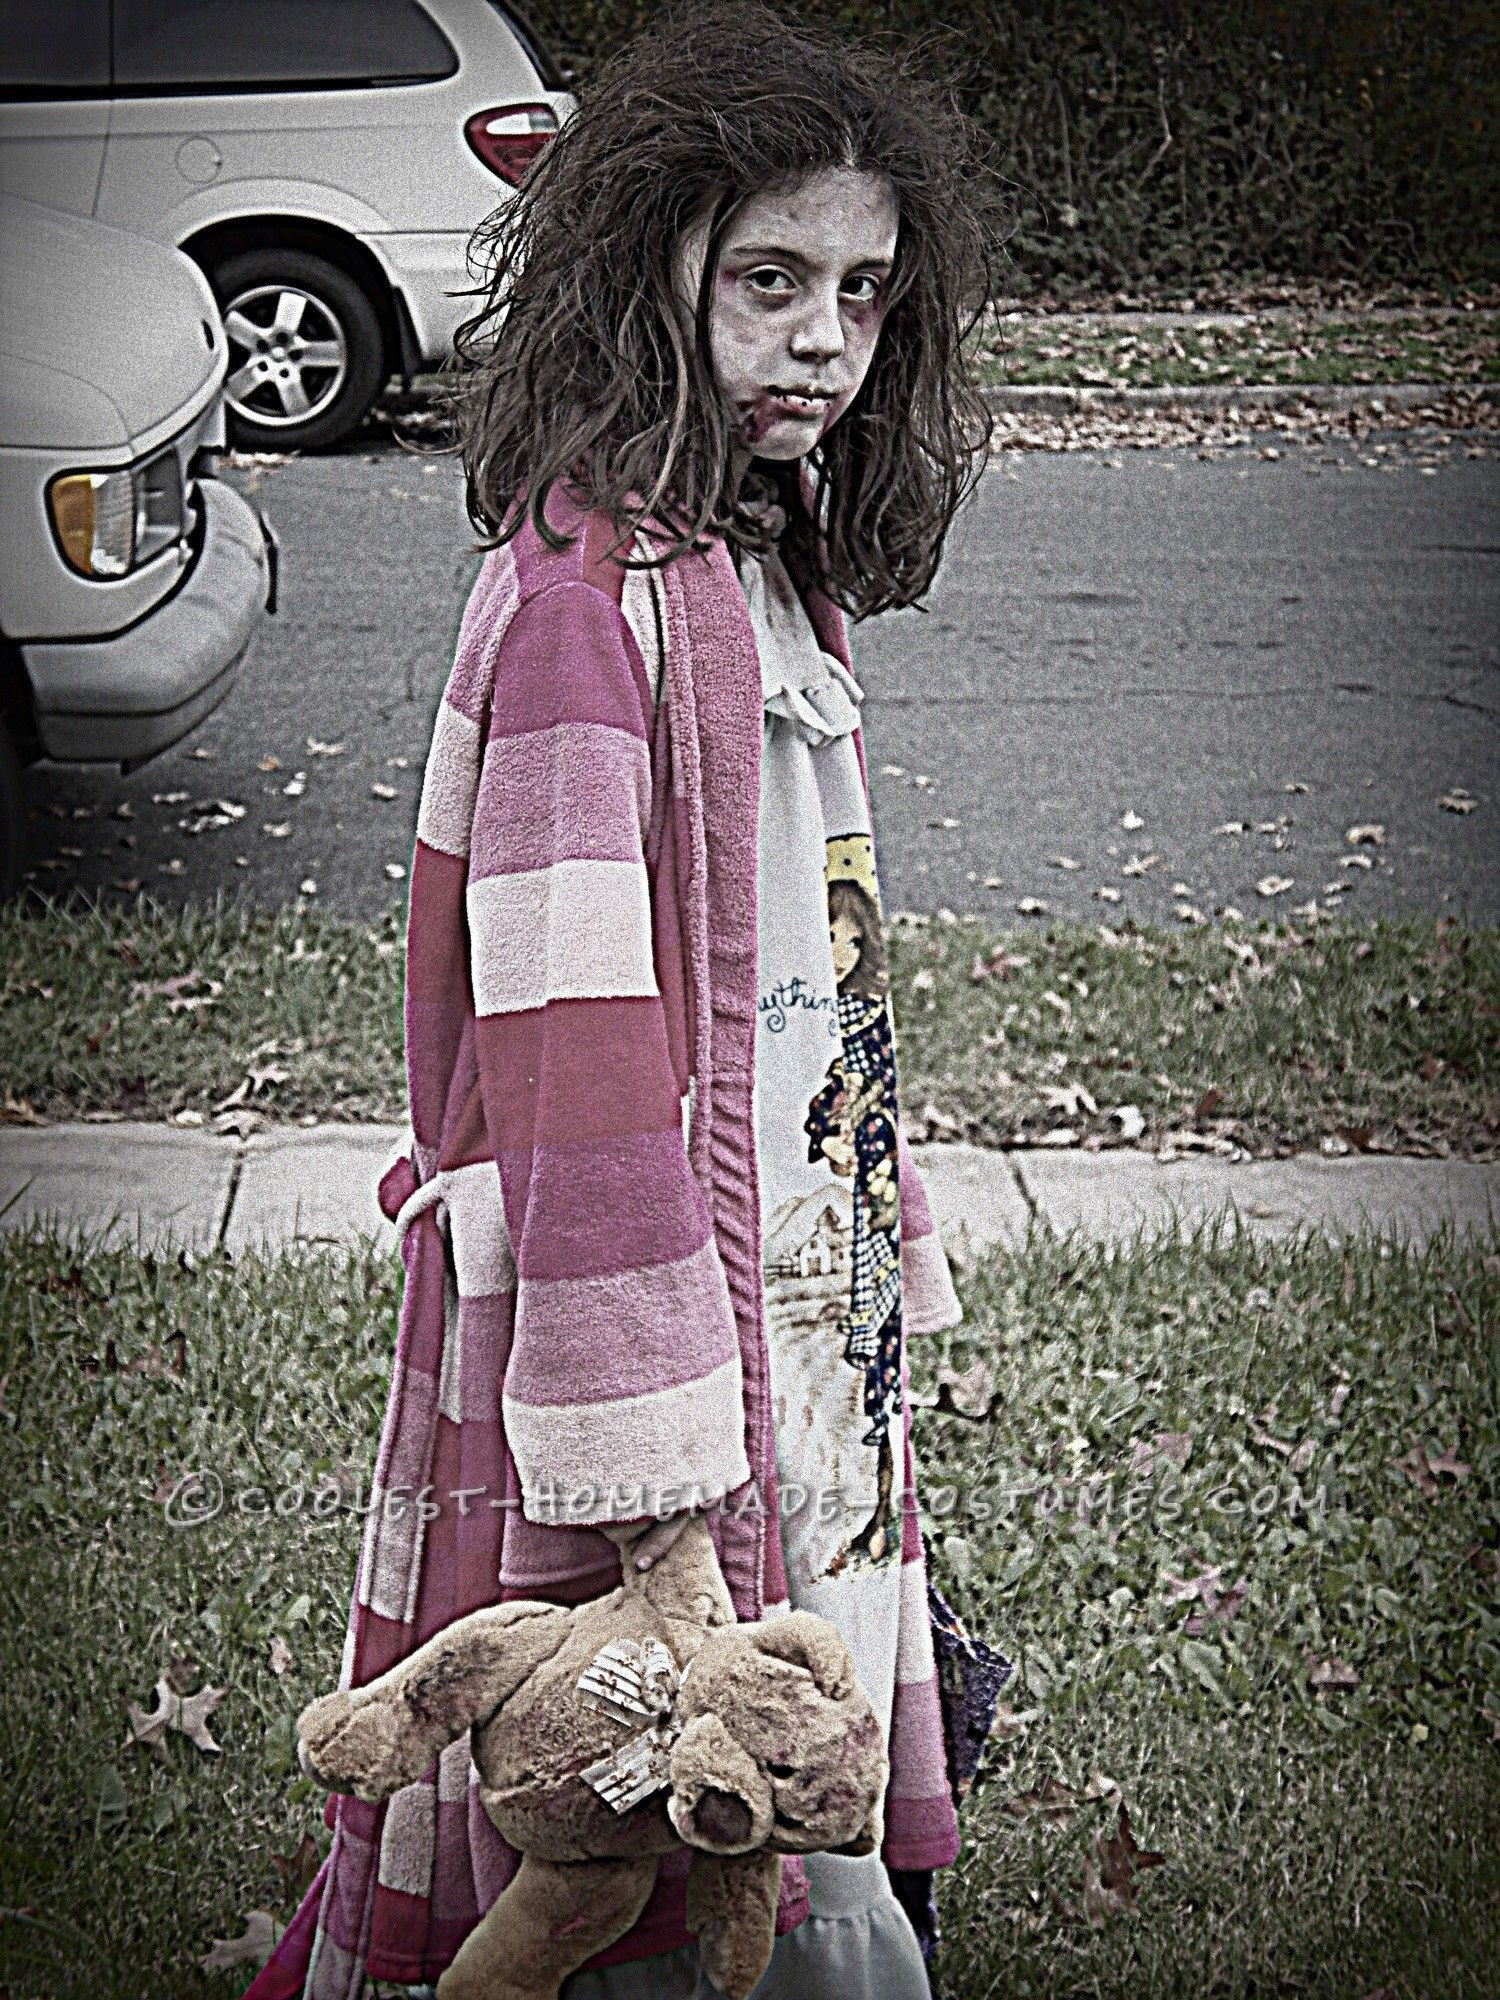 DIY Kids Zombie Costume
 Scary Homemade Costume for a Girl Little Zombie Girl